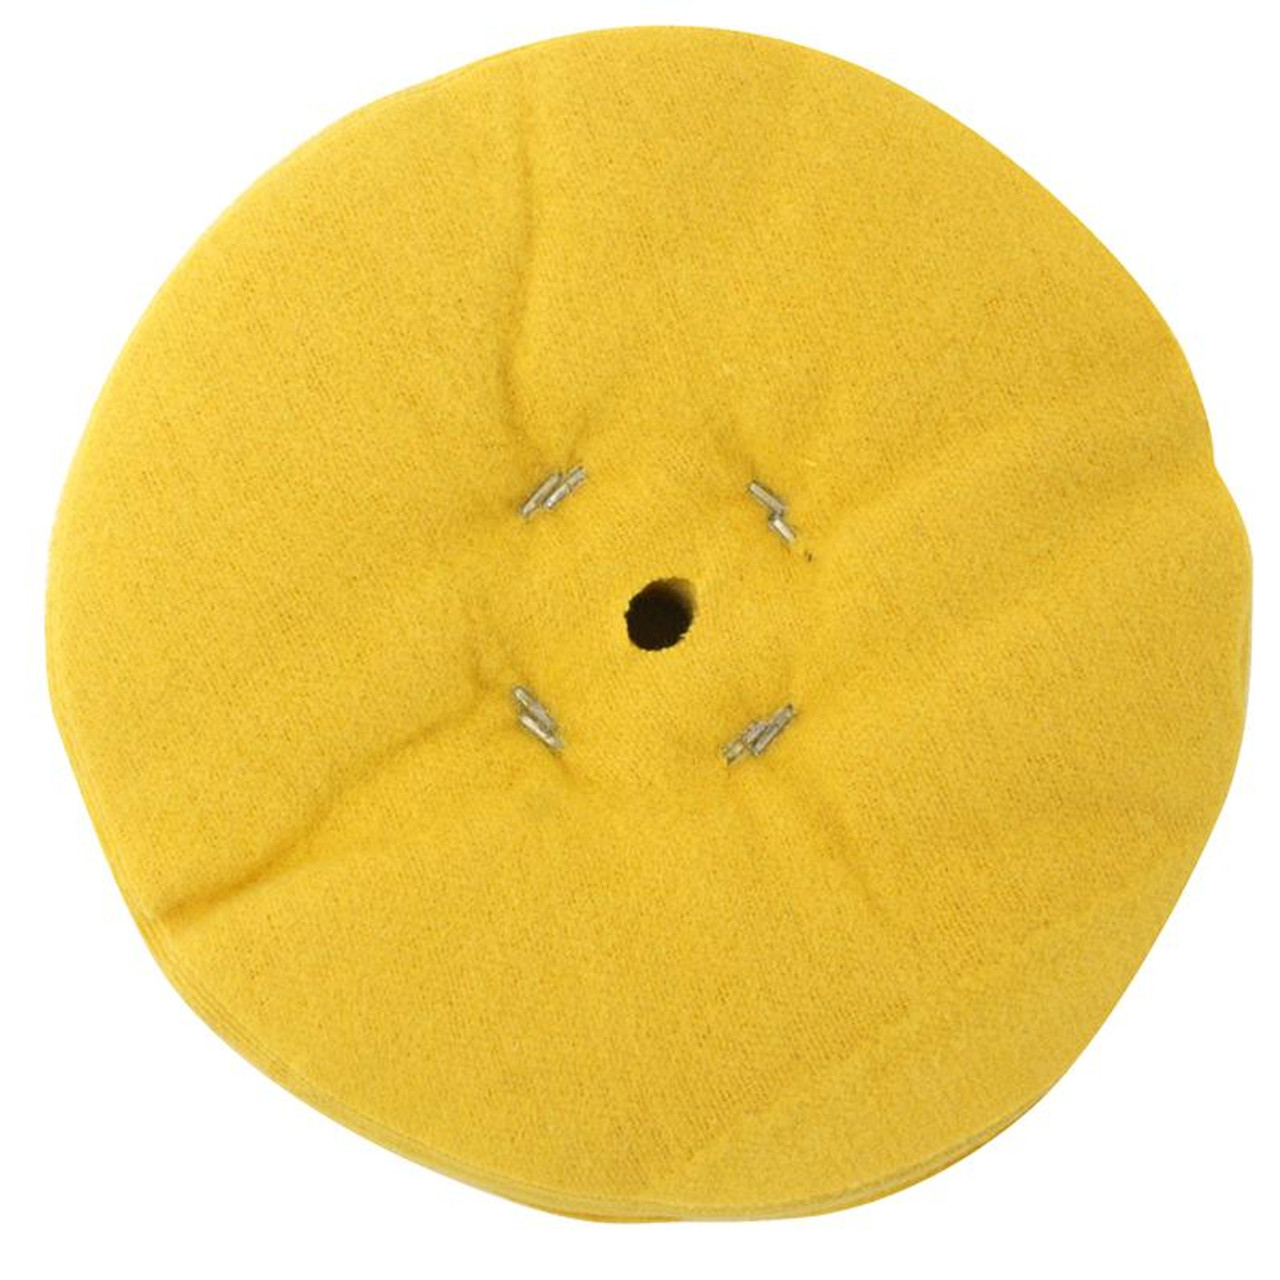 Lieonvis Polishing Wheel 4 Inch Wear Resistant Reusable Buffing Wheel  Professional Polishing Accessories Kit with Polish Compound for Wood  Plastic